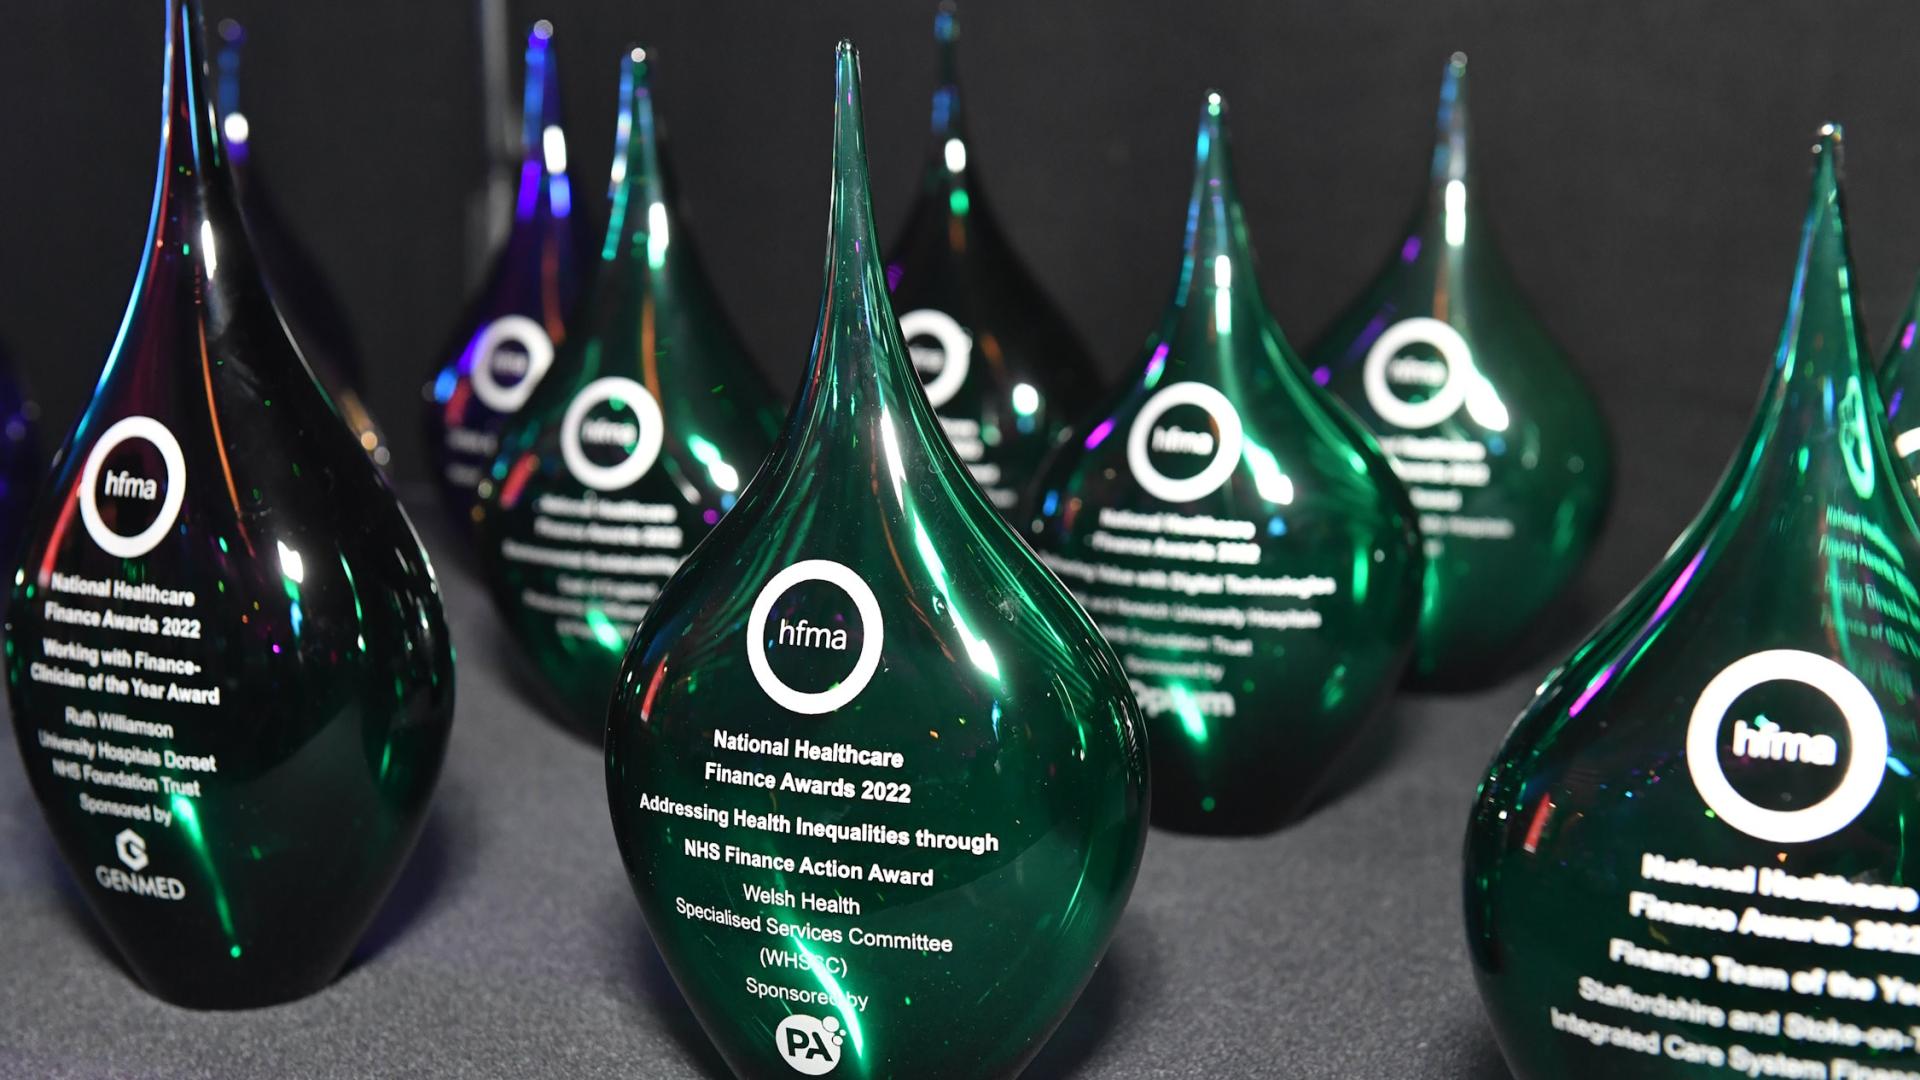 Glass awards presented to HFMA winners in 2022